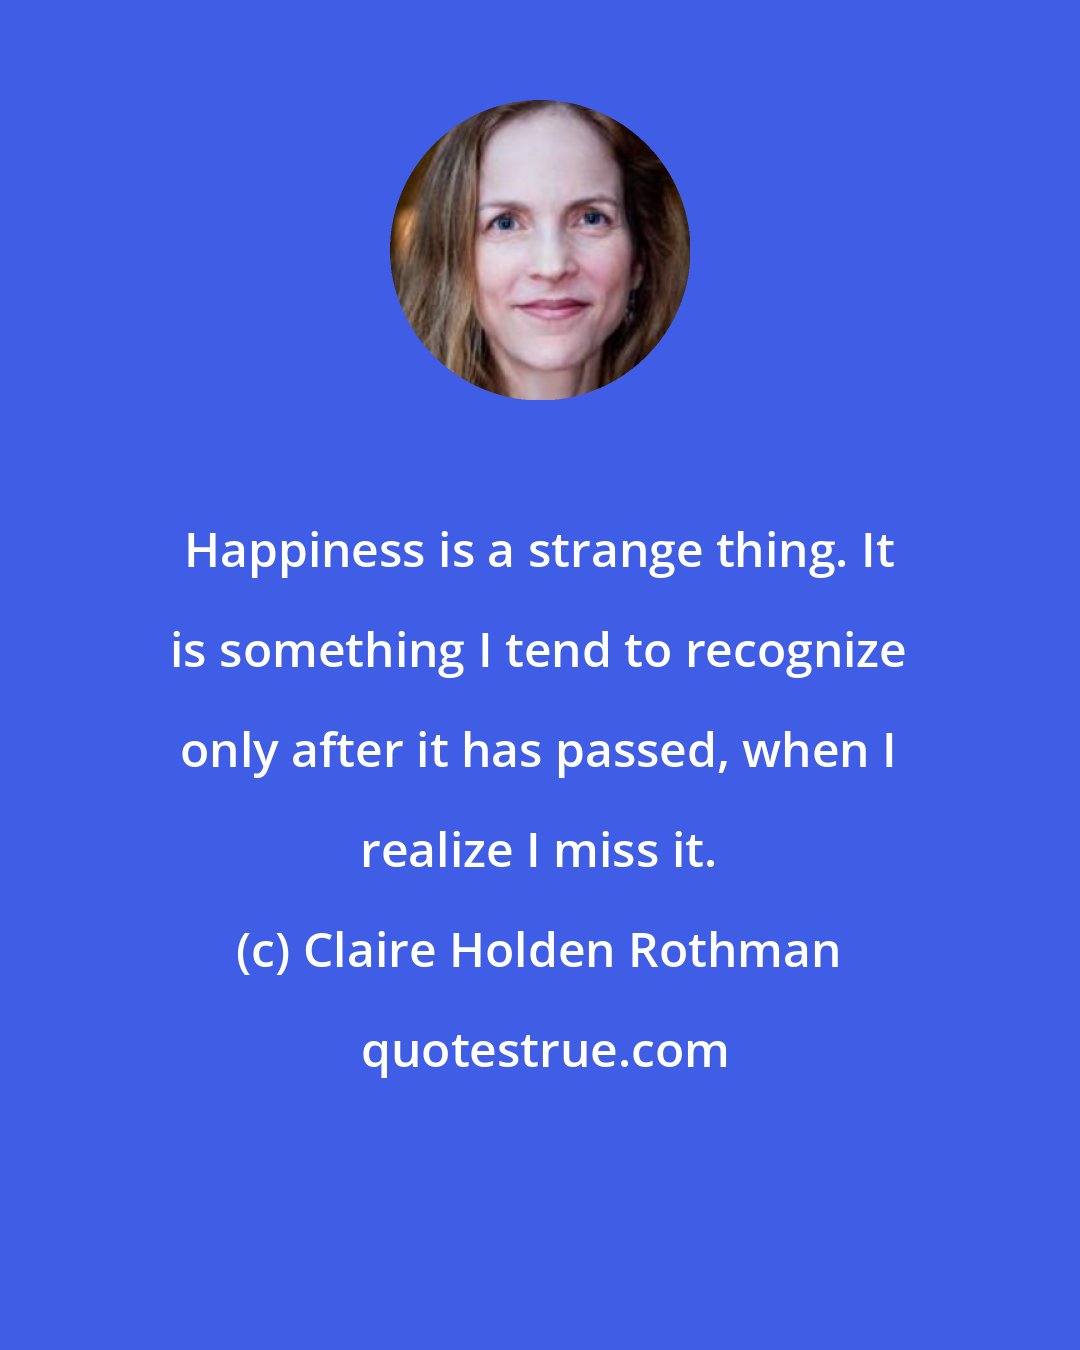 Claire Holden Rothman: Happiness is a strange thing. It is something I tend to recognize only after it has passed, when I realize I miss it.